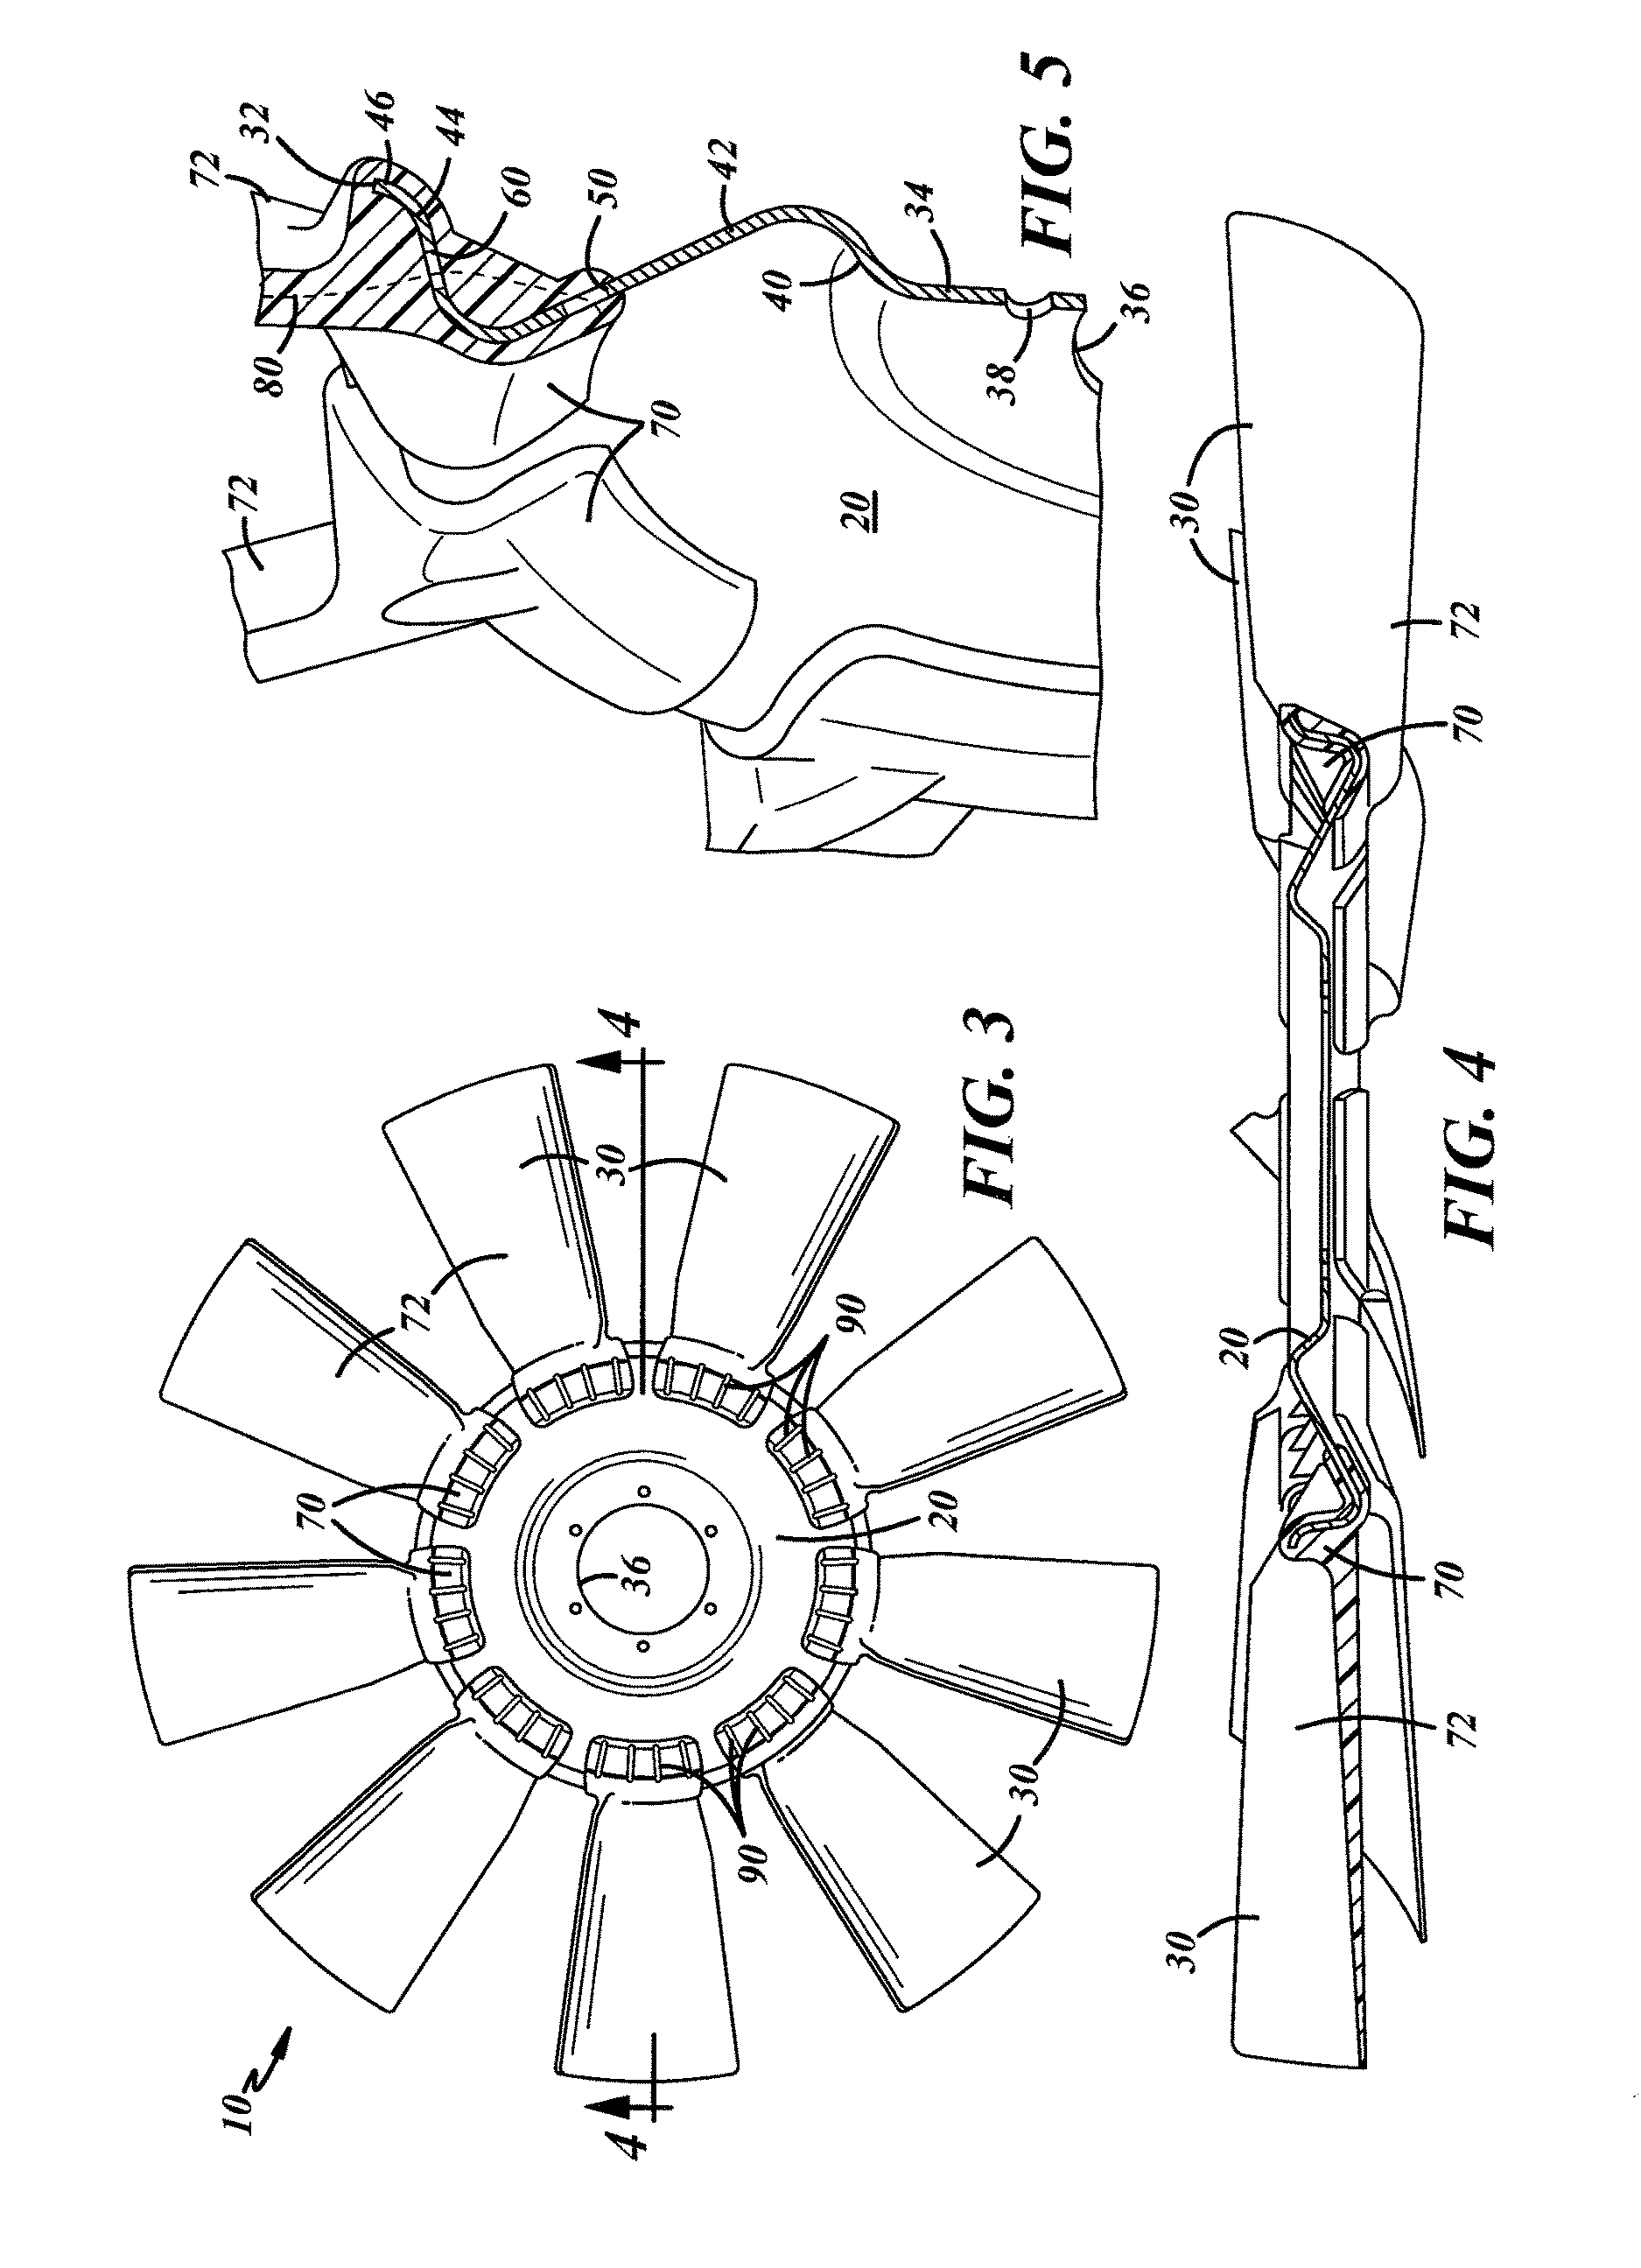 Fan with overmolded blades